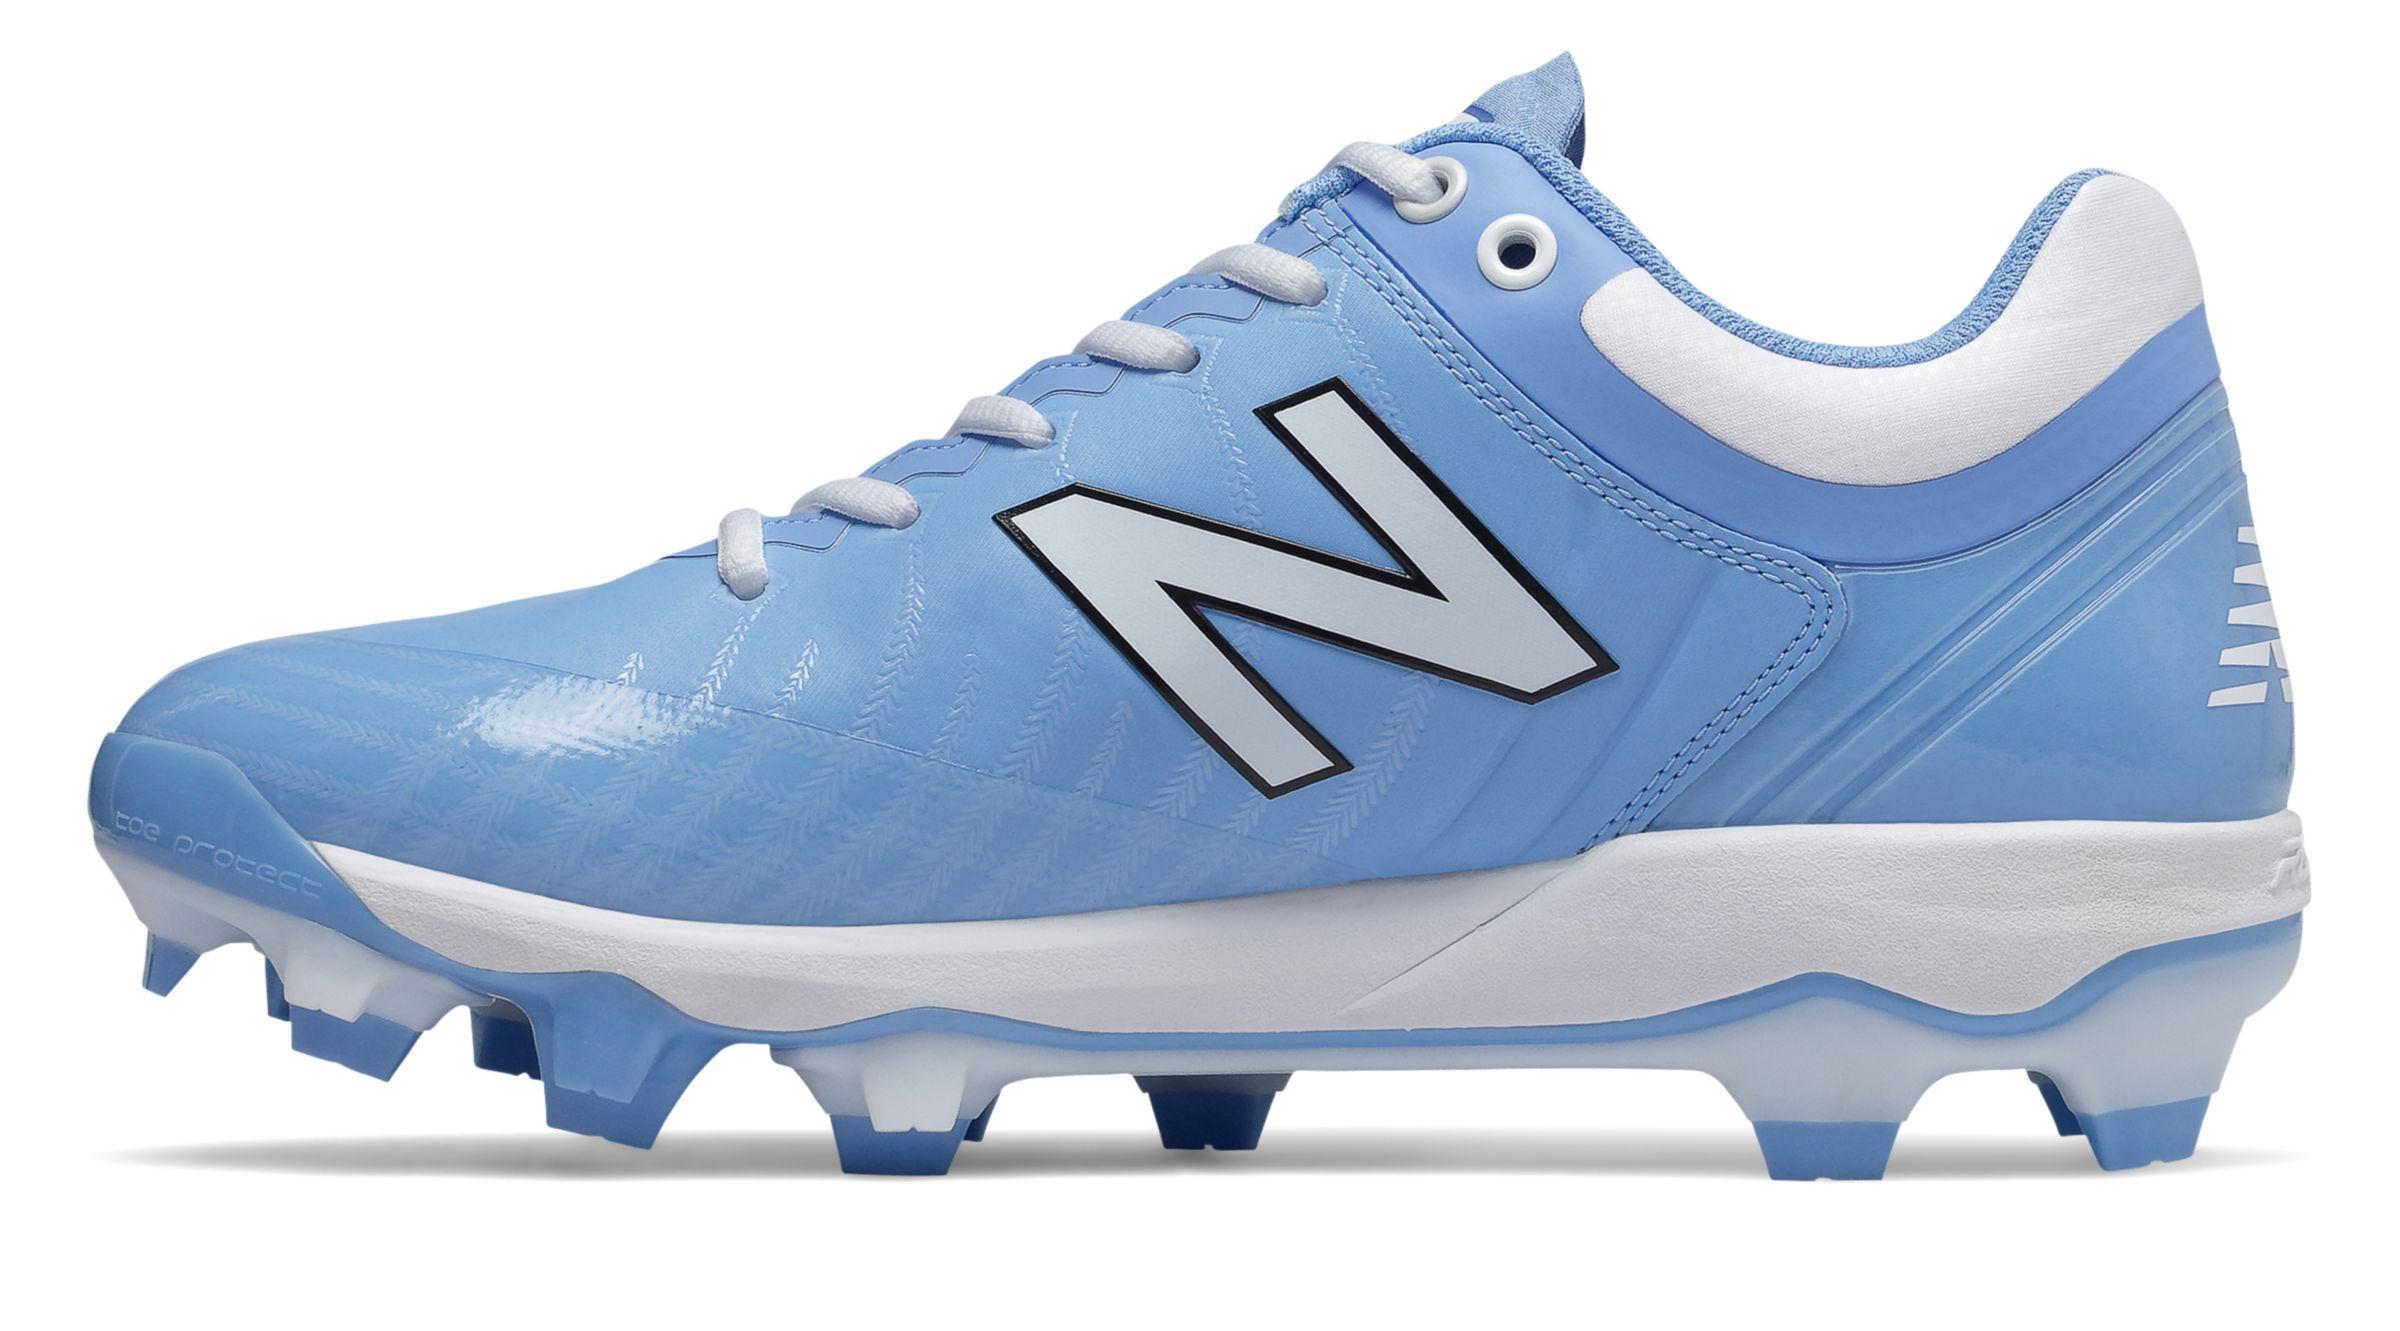 New Balance 4040v5 Tpu Cleats And Turf Shoes in Blue/White (Blue) for ...